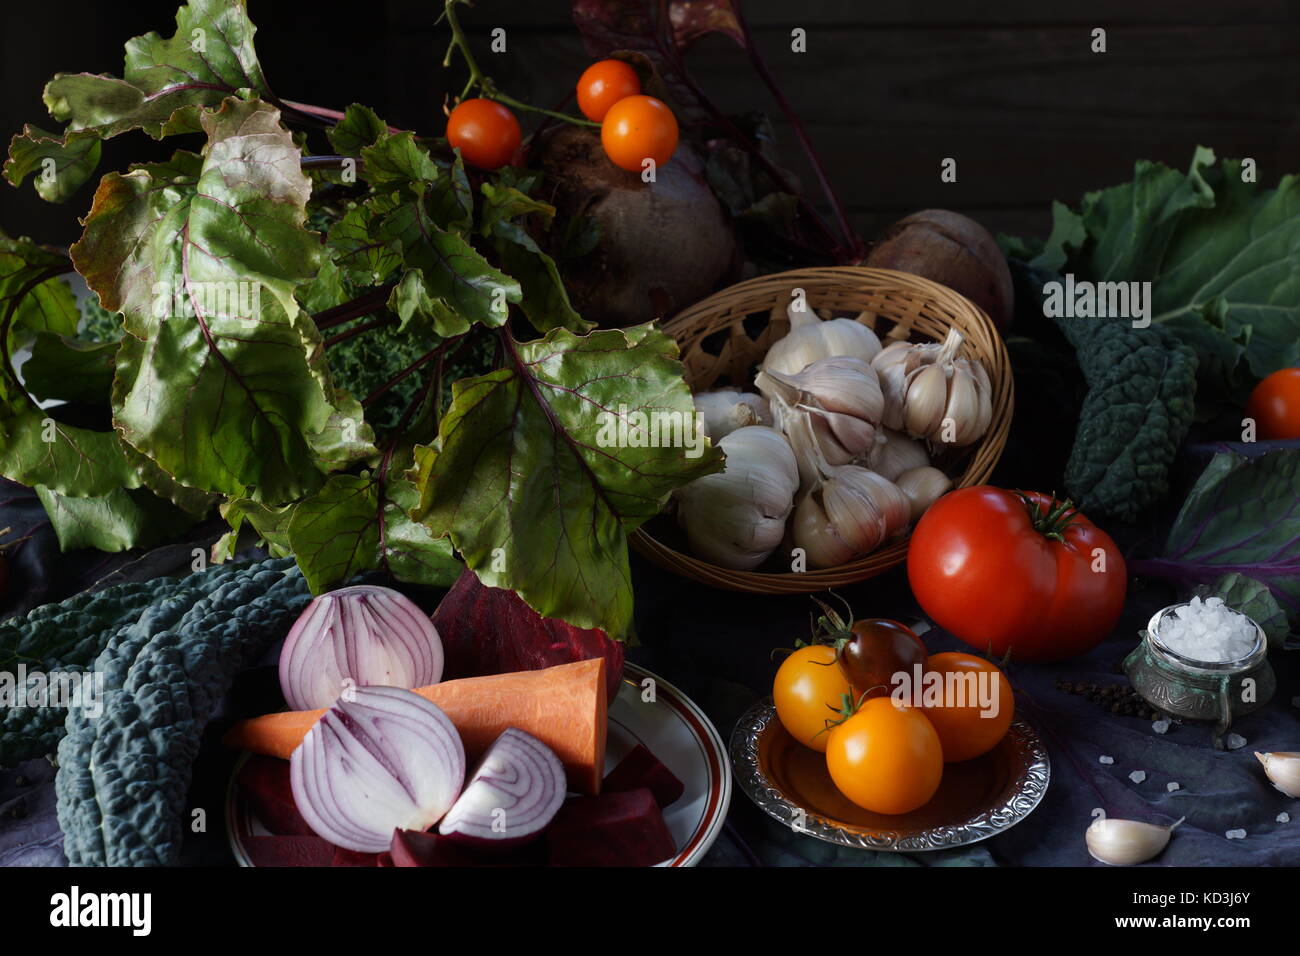 Still life: basket with garlic, tomatoes, kale leaves, red onions, carrots, Brussels red cabbage and salt among the greens on the table. Stock Photo